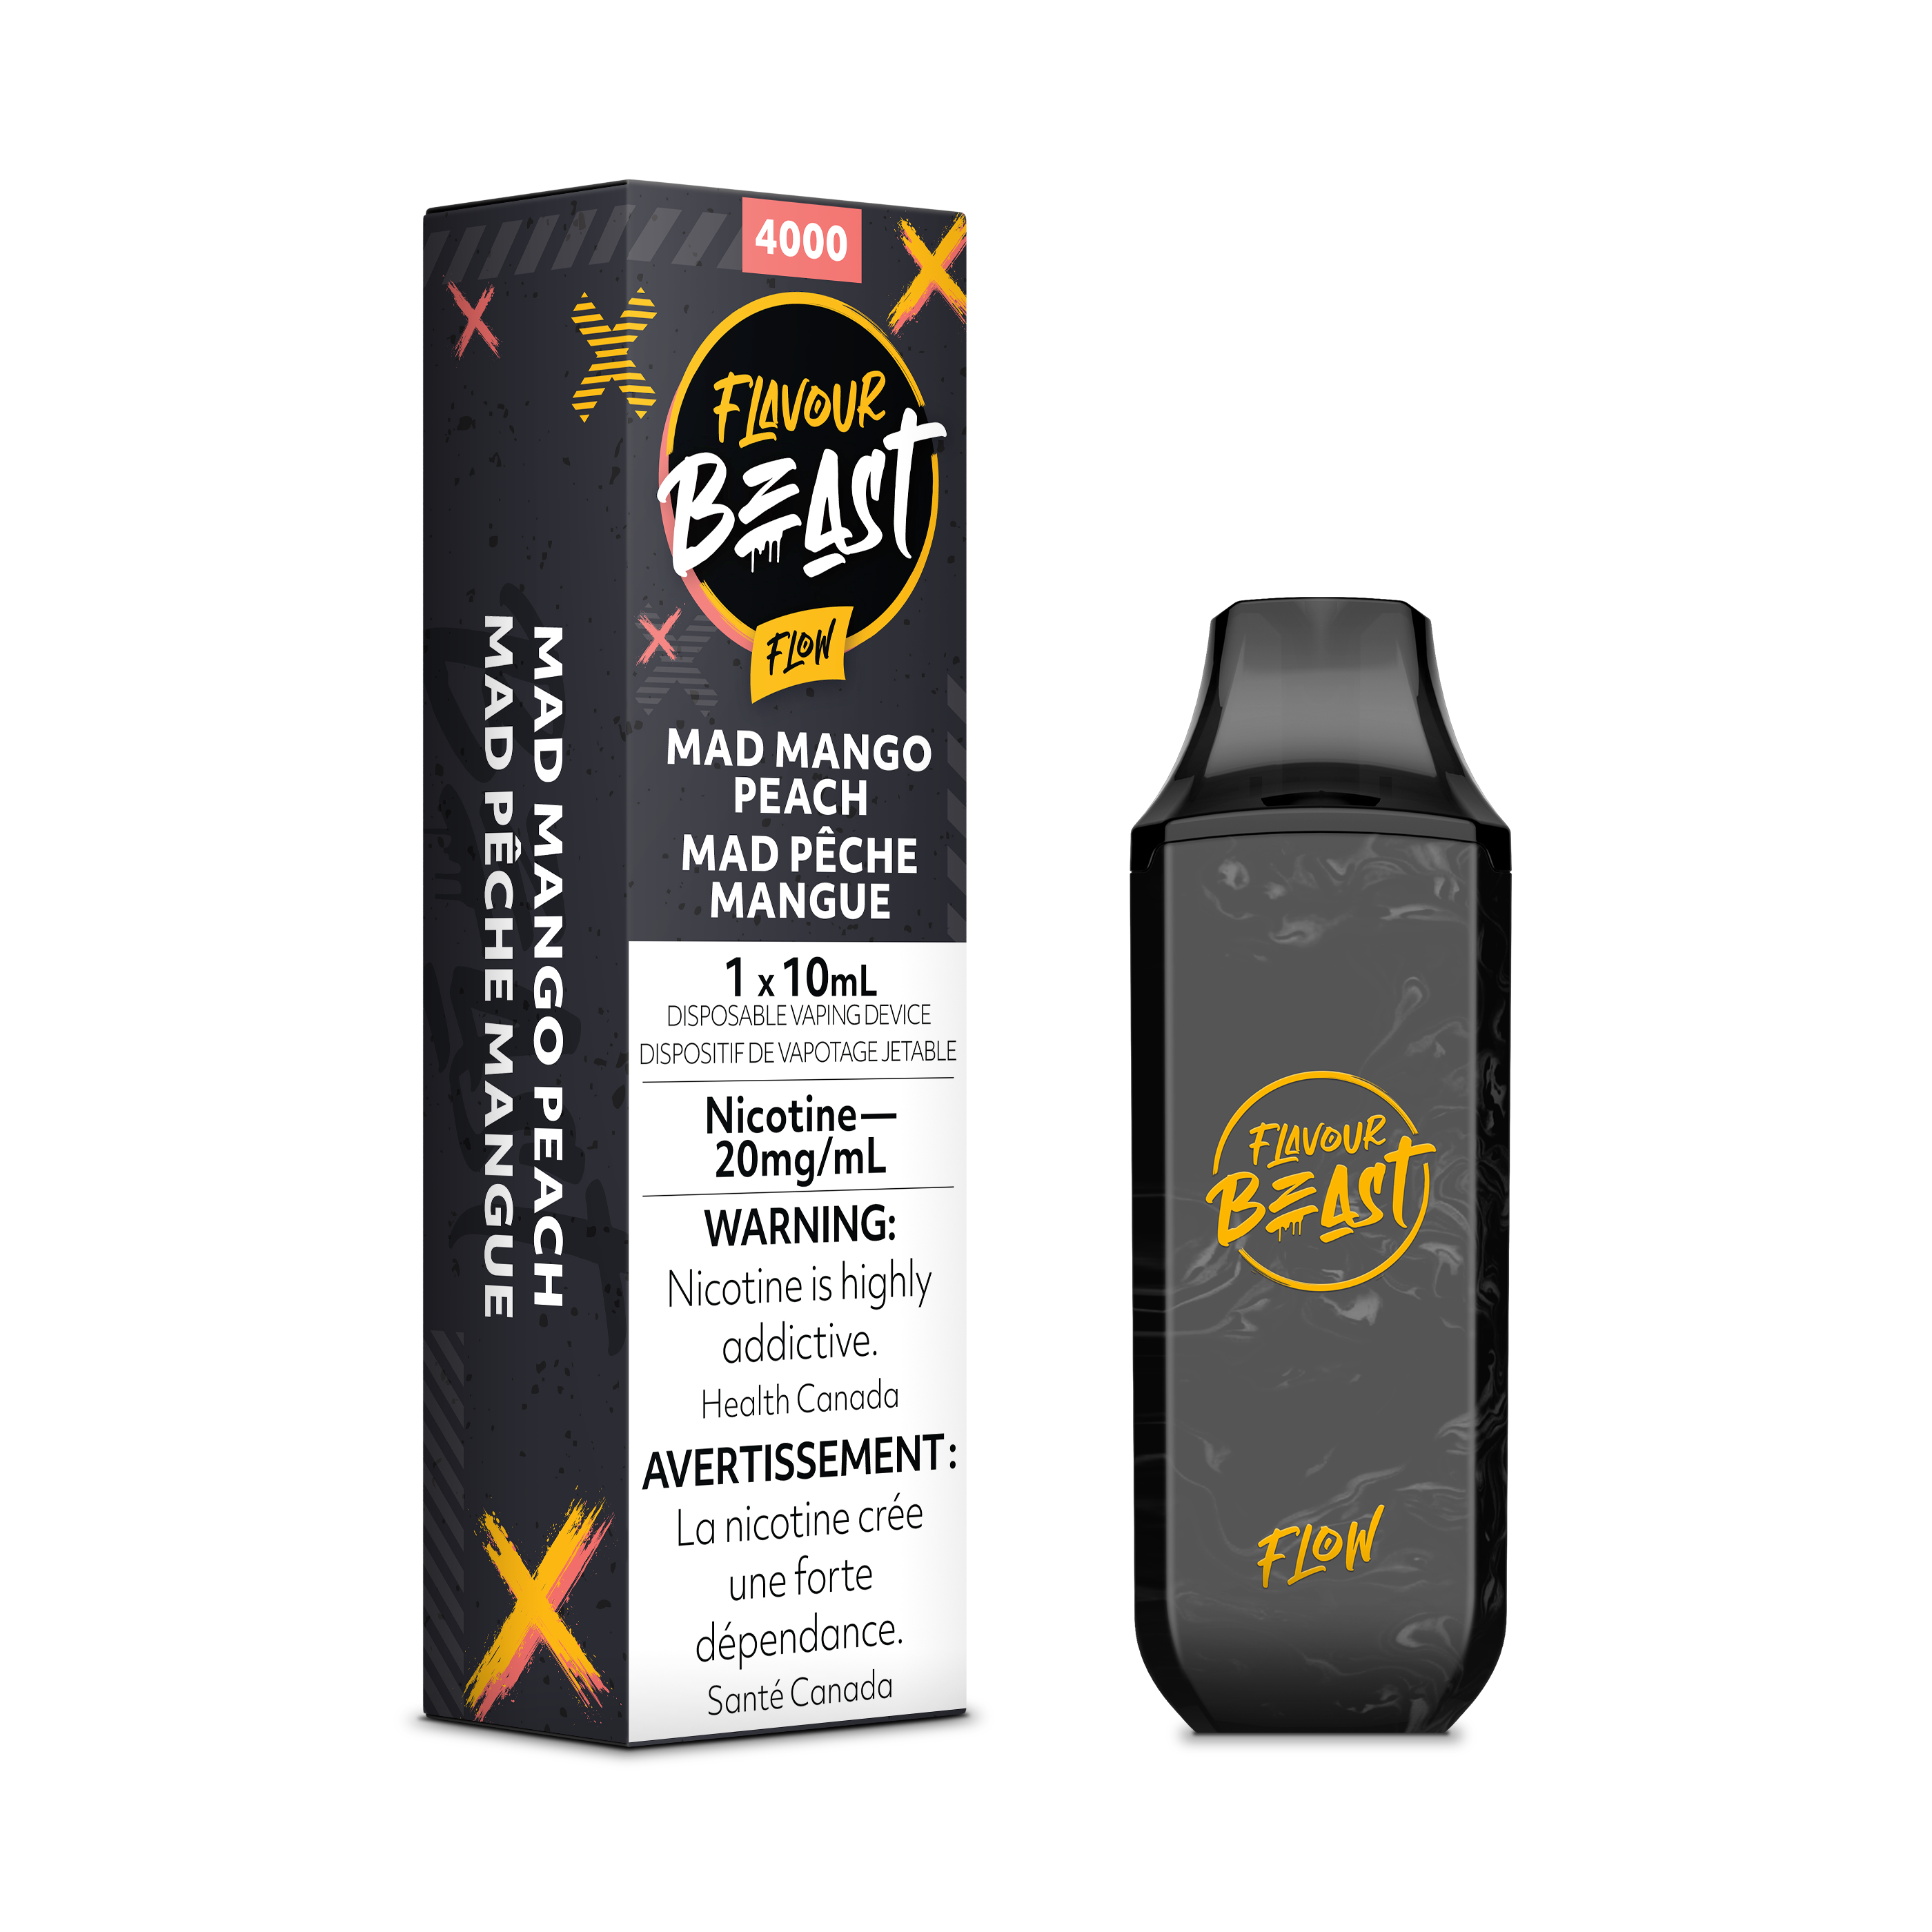 Mad Mango Peach - Flavour Beast Flow 4000 - EXCISED